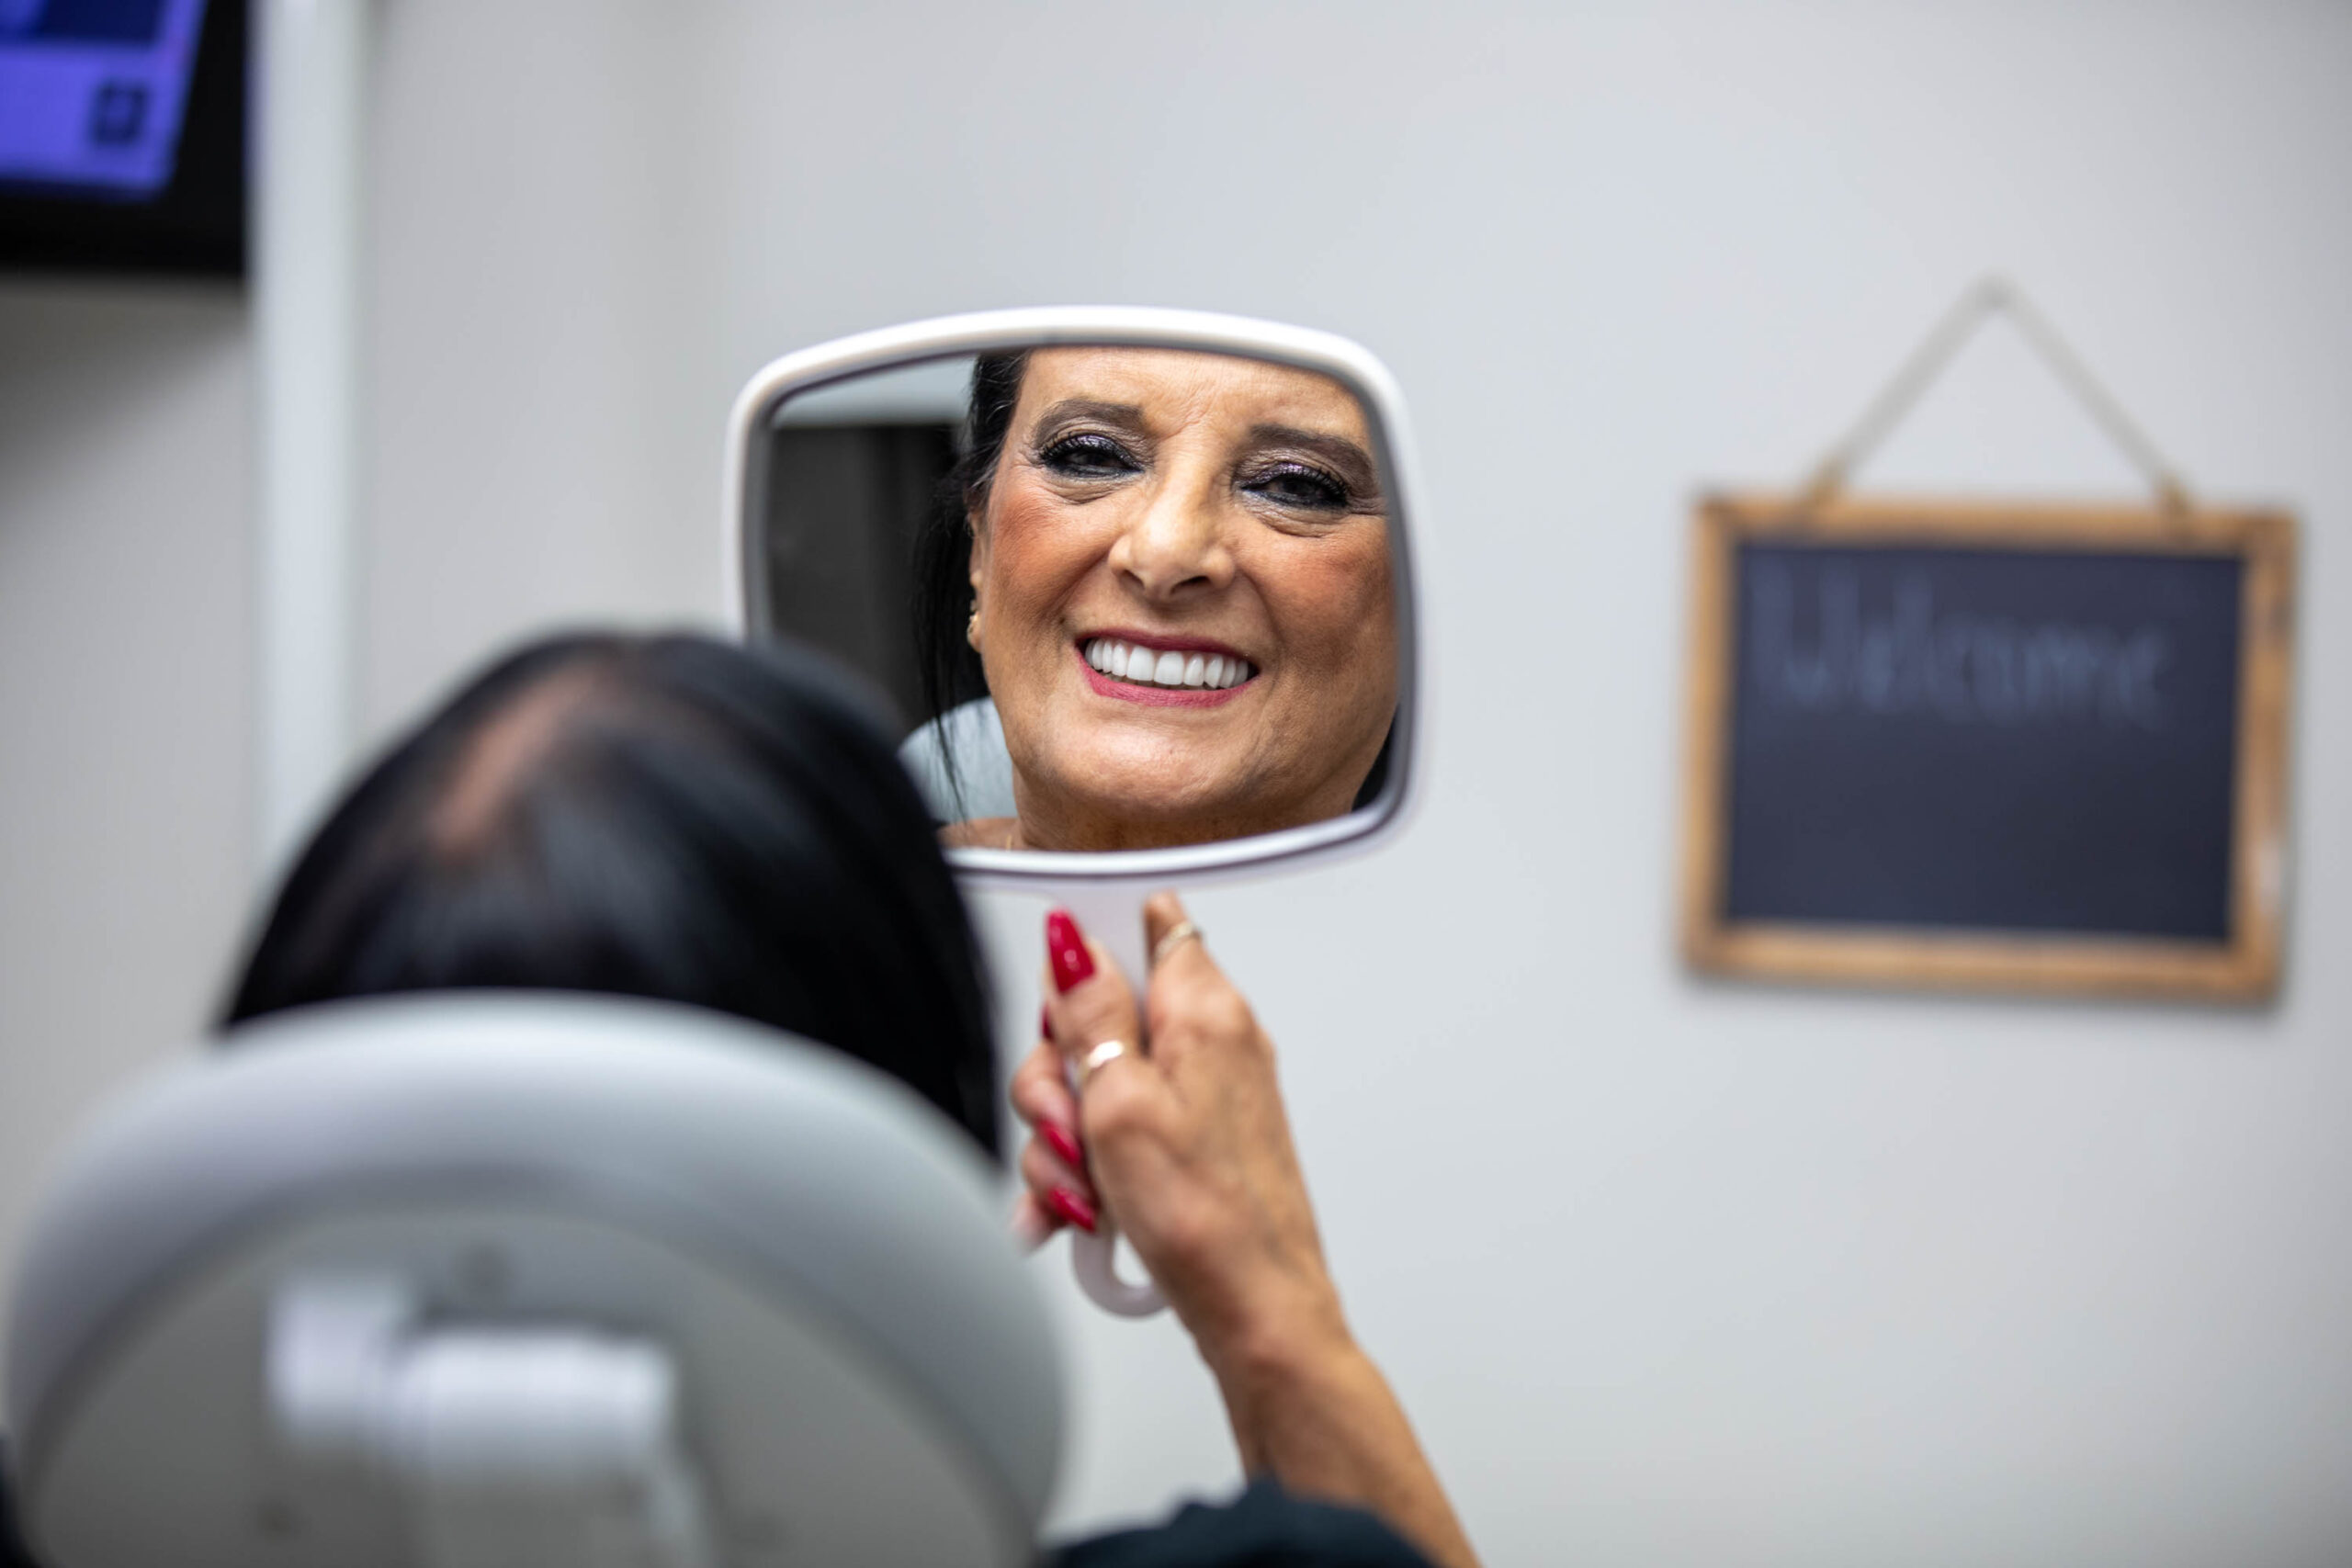 a patient admiring her smile in a hand held mirror after Dr. Azar has treated her with Invisalign.